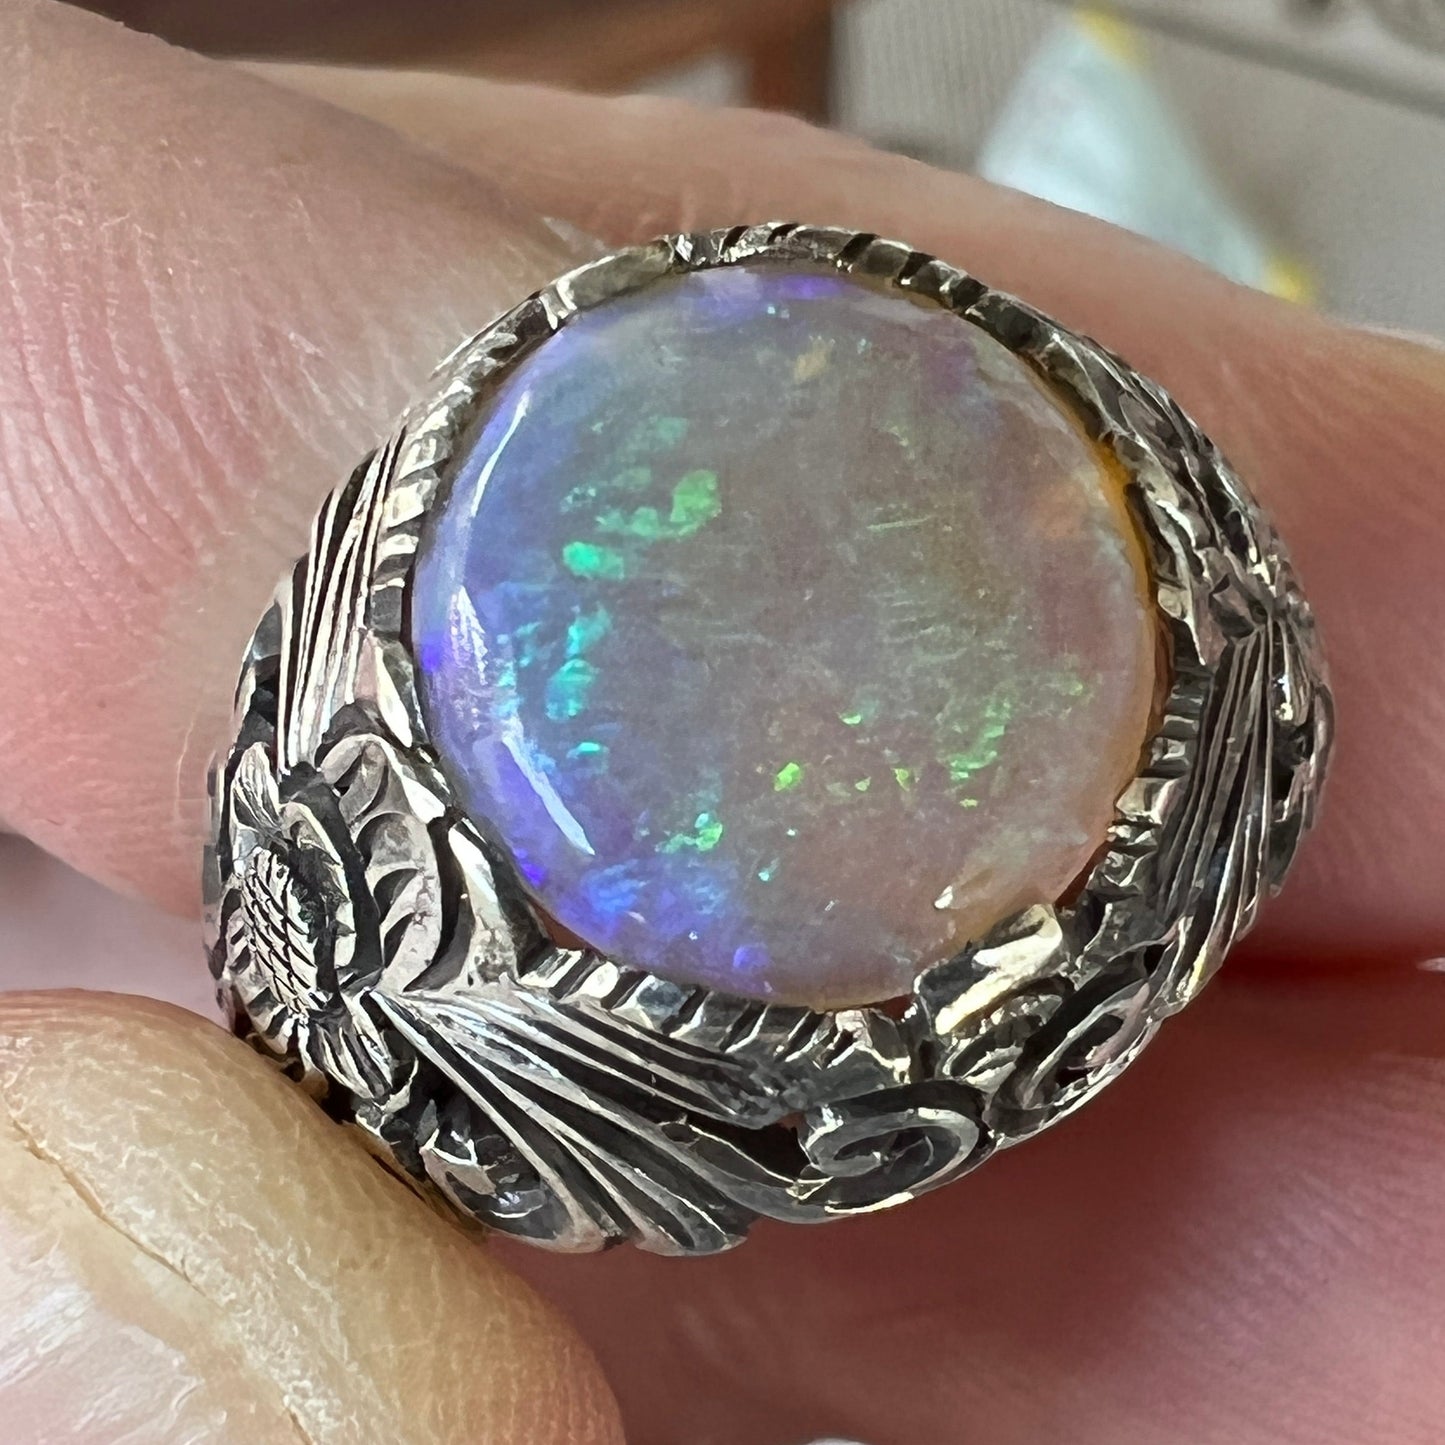 Beautiful one-off bespoke piece showing off a beautiful round cabochon Coober Pedy crystal opal, displaying magnificent greens.